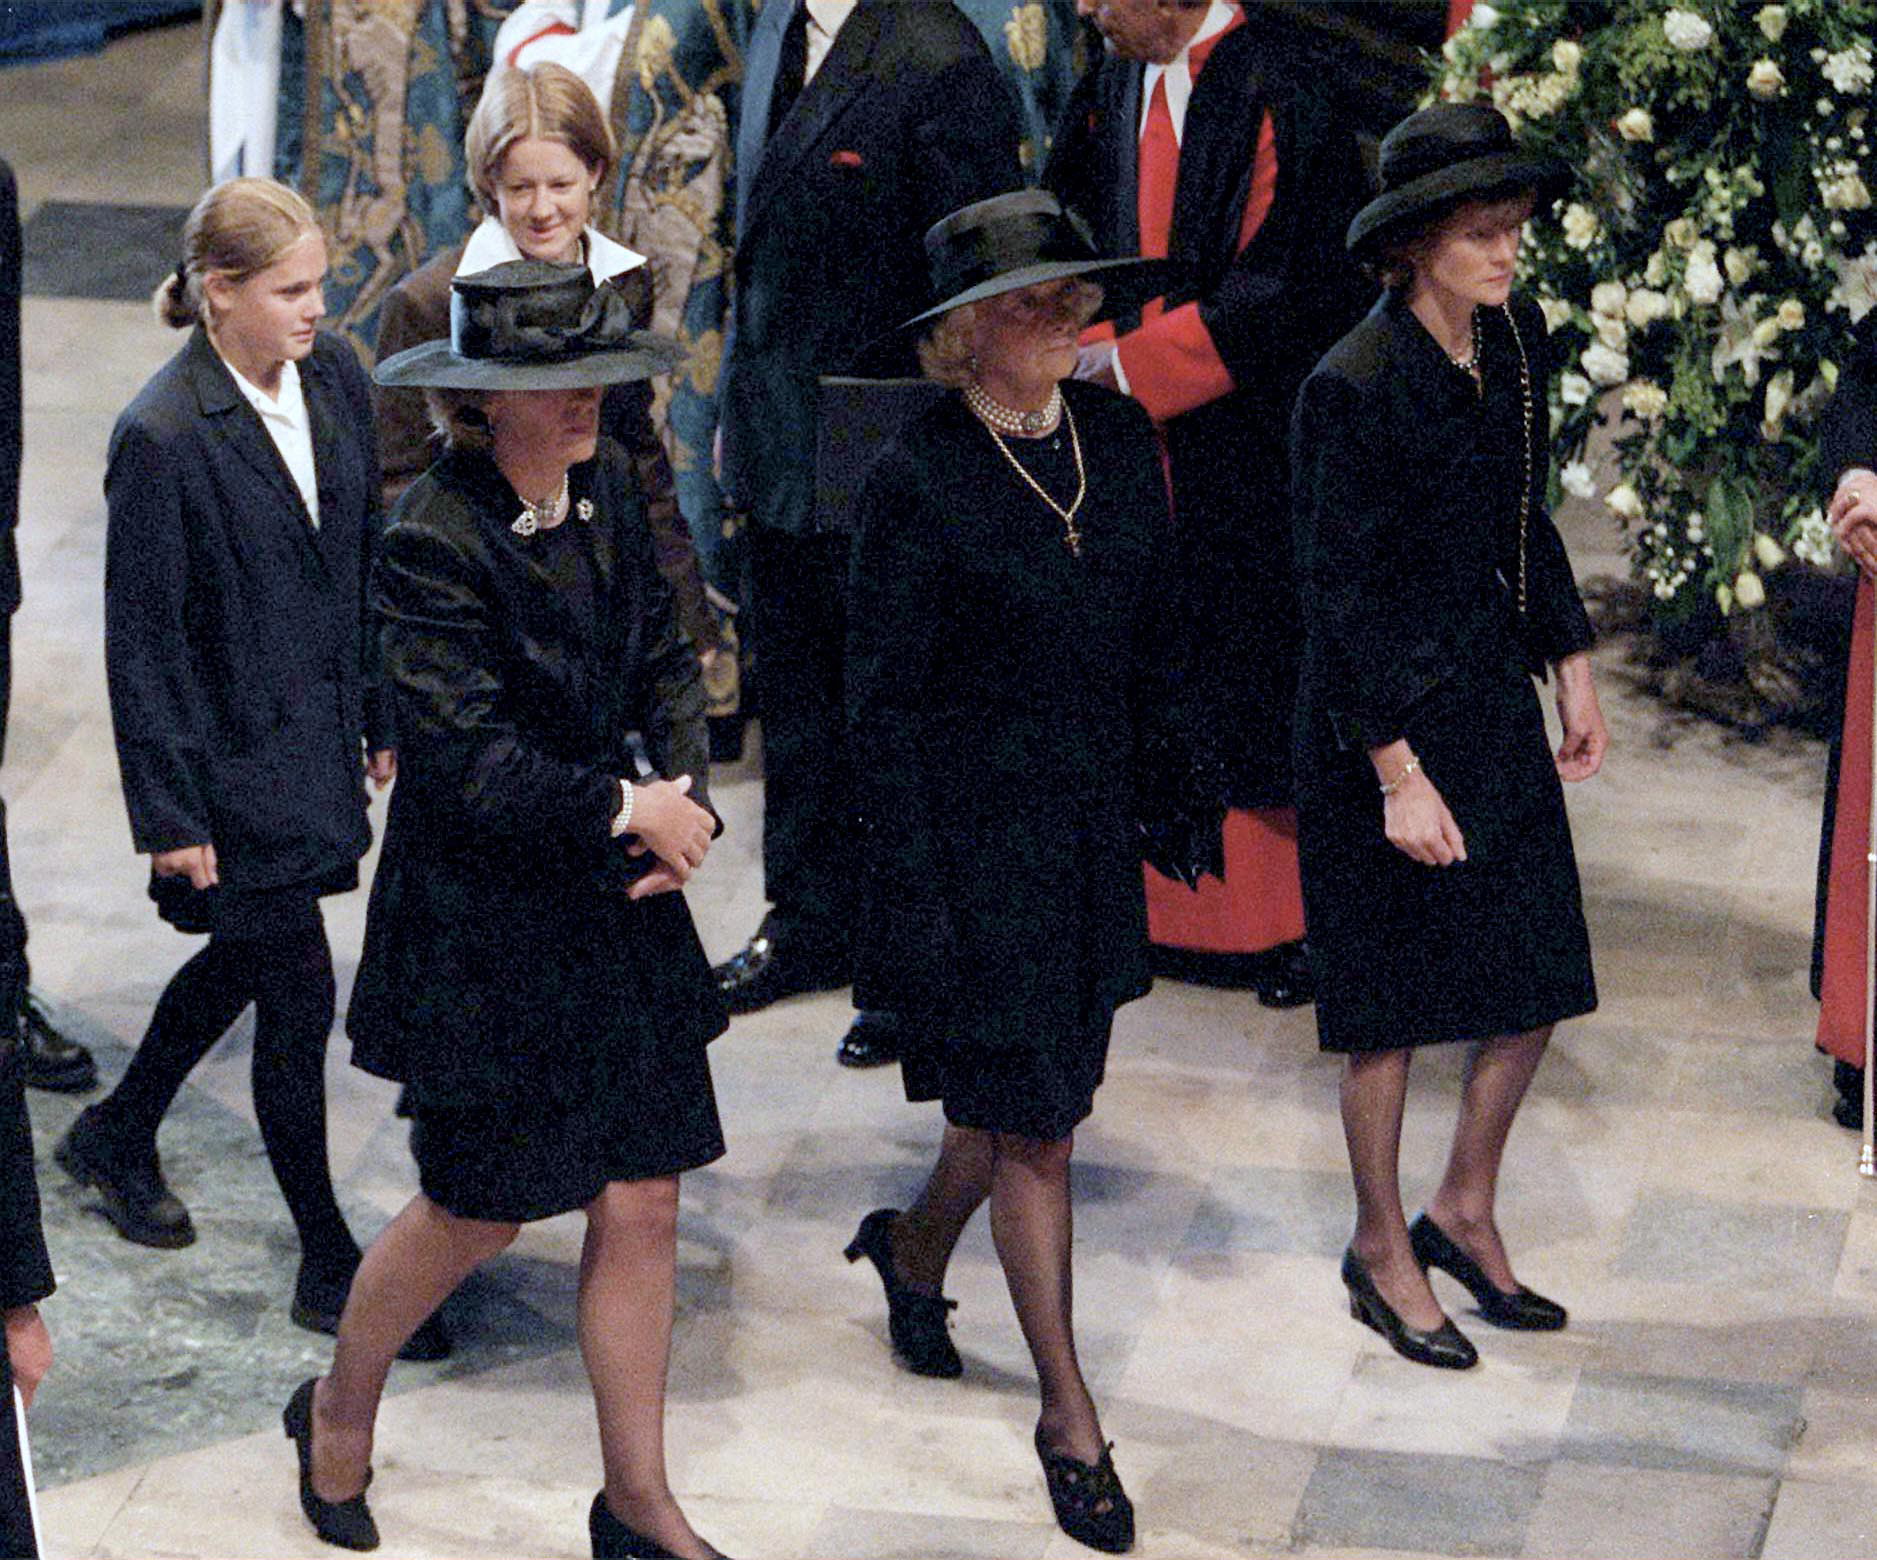 (L To R) Jane Fellowes, Mrs Frances Shand-kydd And Lady Sarah Mccorquodale at the funeral of Princess Diana in 1997. (Pool/Tim Graham Picture Library—Tim Graham/Getty Images)